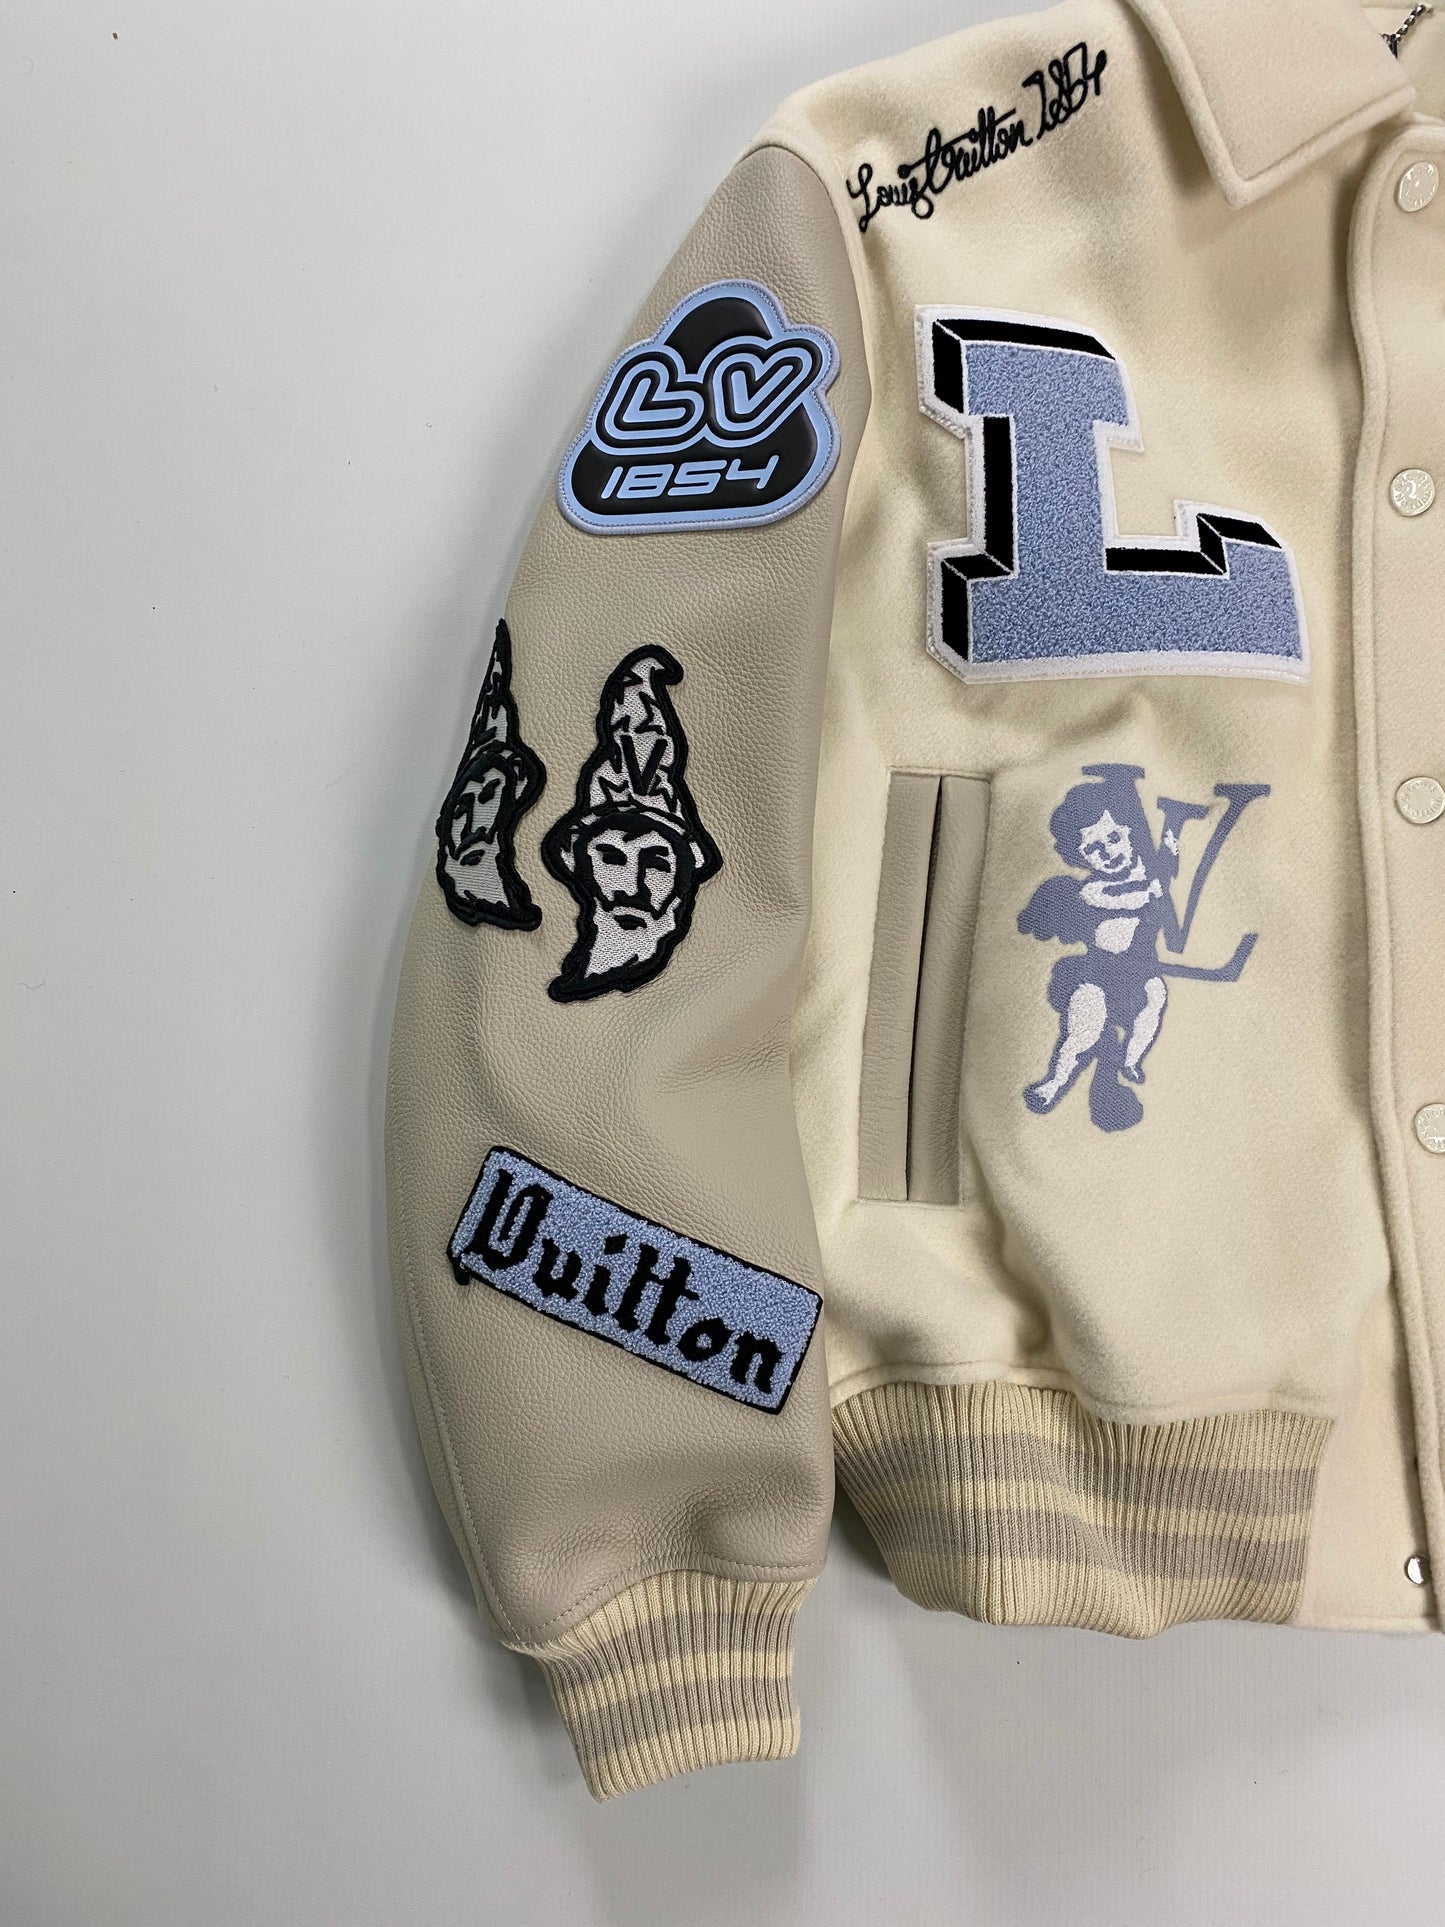 LV Bunny Patches Varsity Jacket For Sale - William Jacket